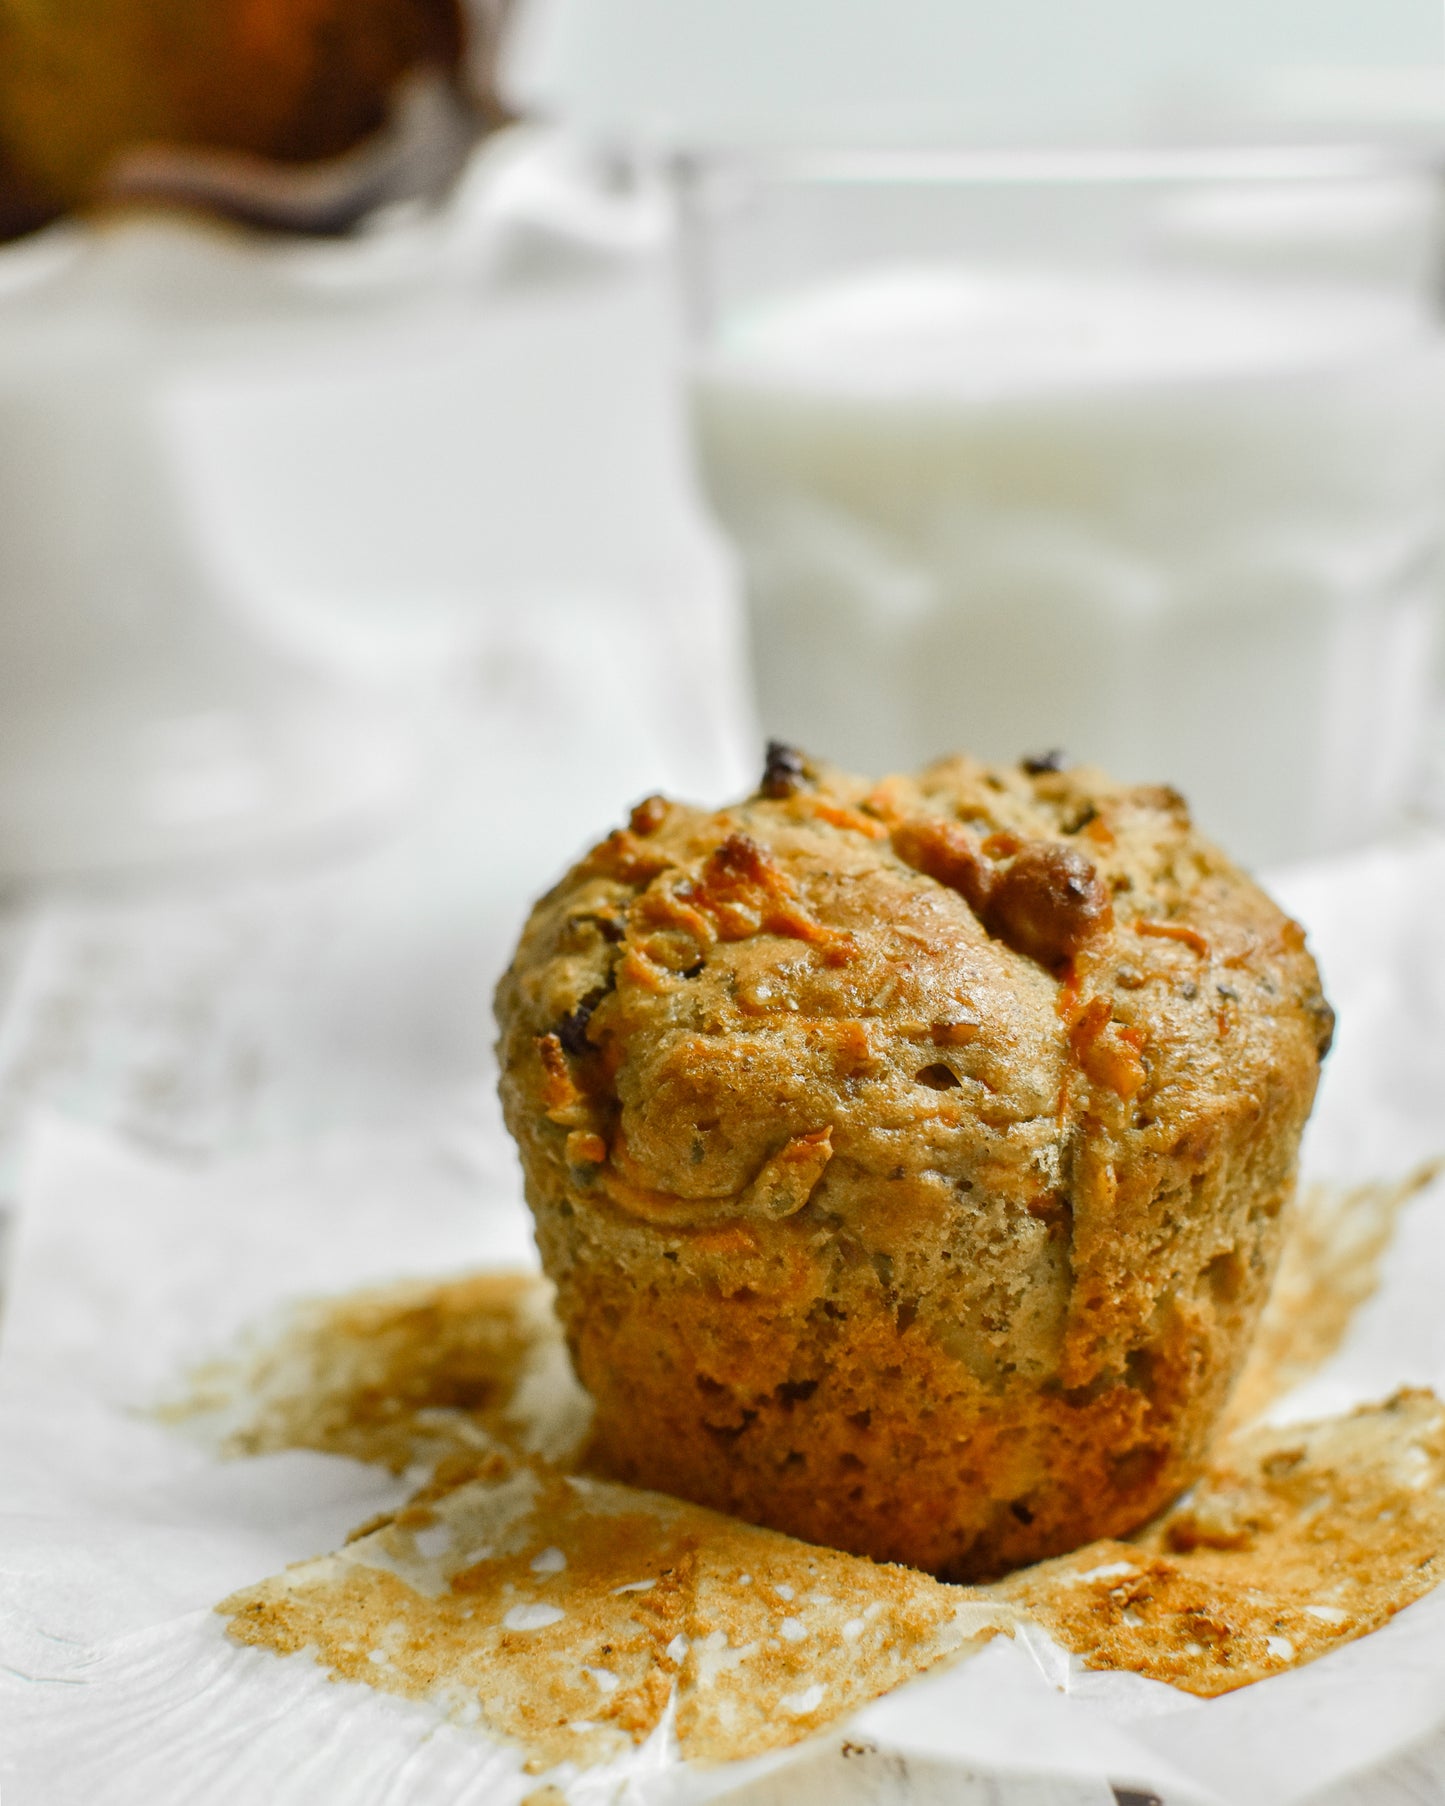 Carrot with Walnuts and Raisins Muffin (whole wheat)